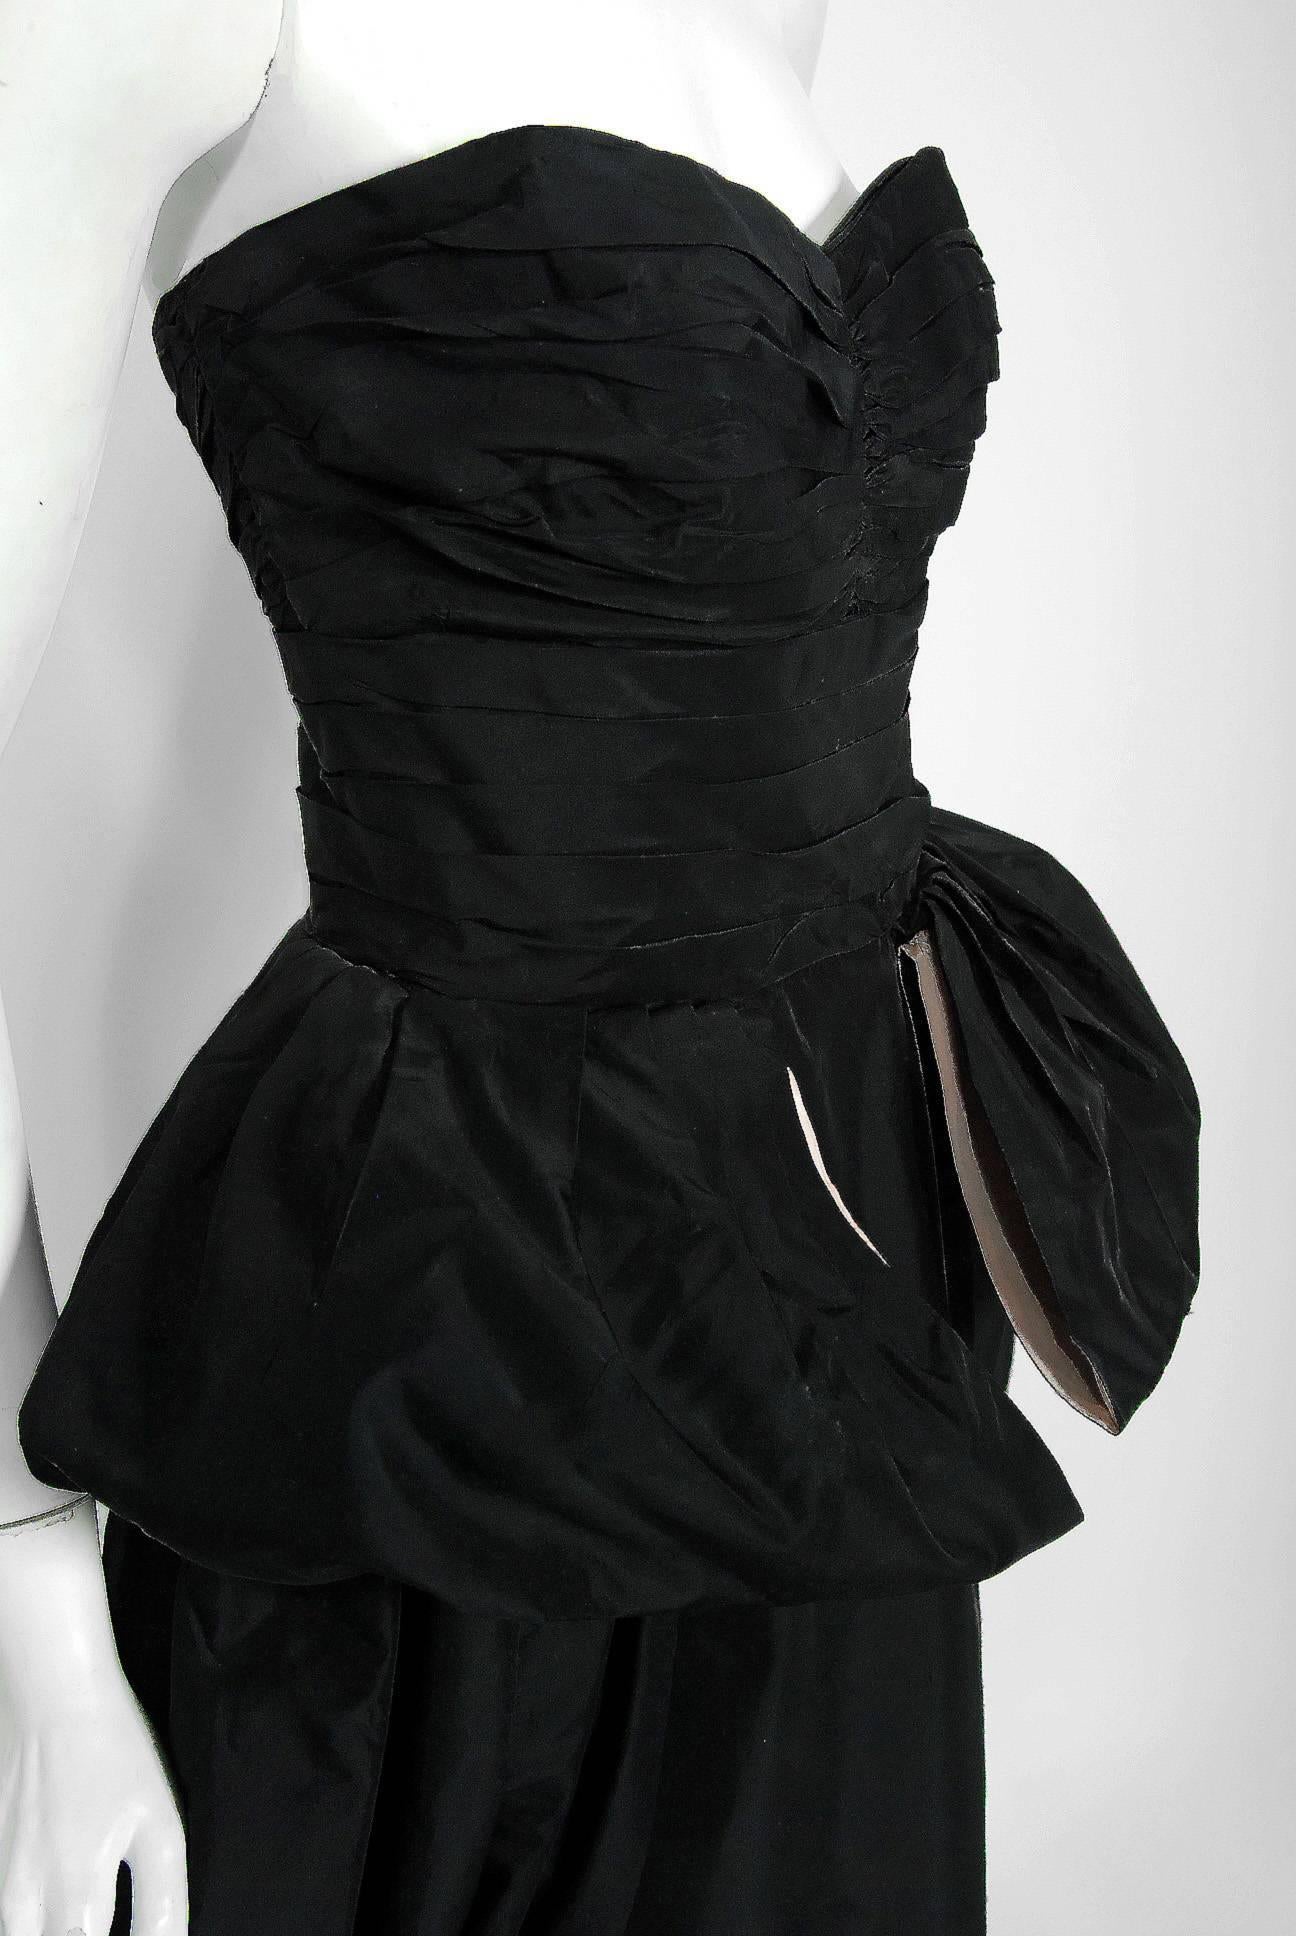 A breathtaking Clifton Wilhite of Dallas designer black and pink taffeta evening dress from the Old Hollywood era of glamour. The bodice has a gorgeous ruched sweetheart plunge with seductive boned strapless. I adore that  hourglass nipped waist